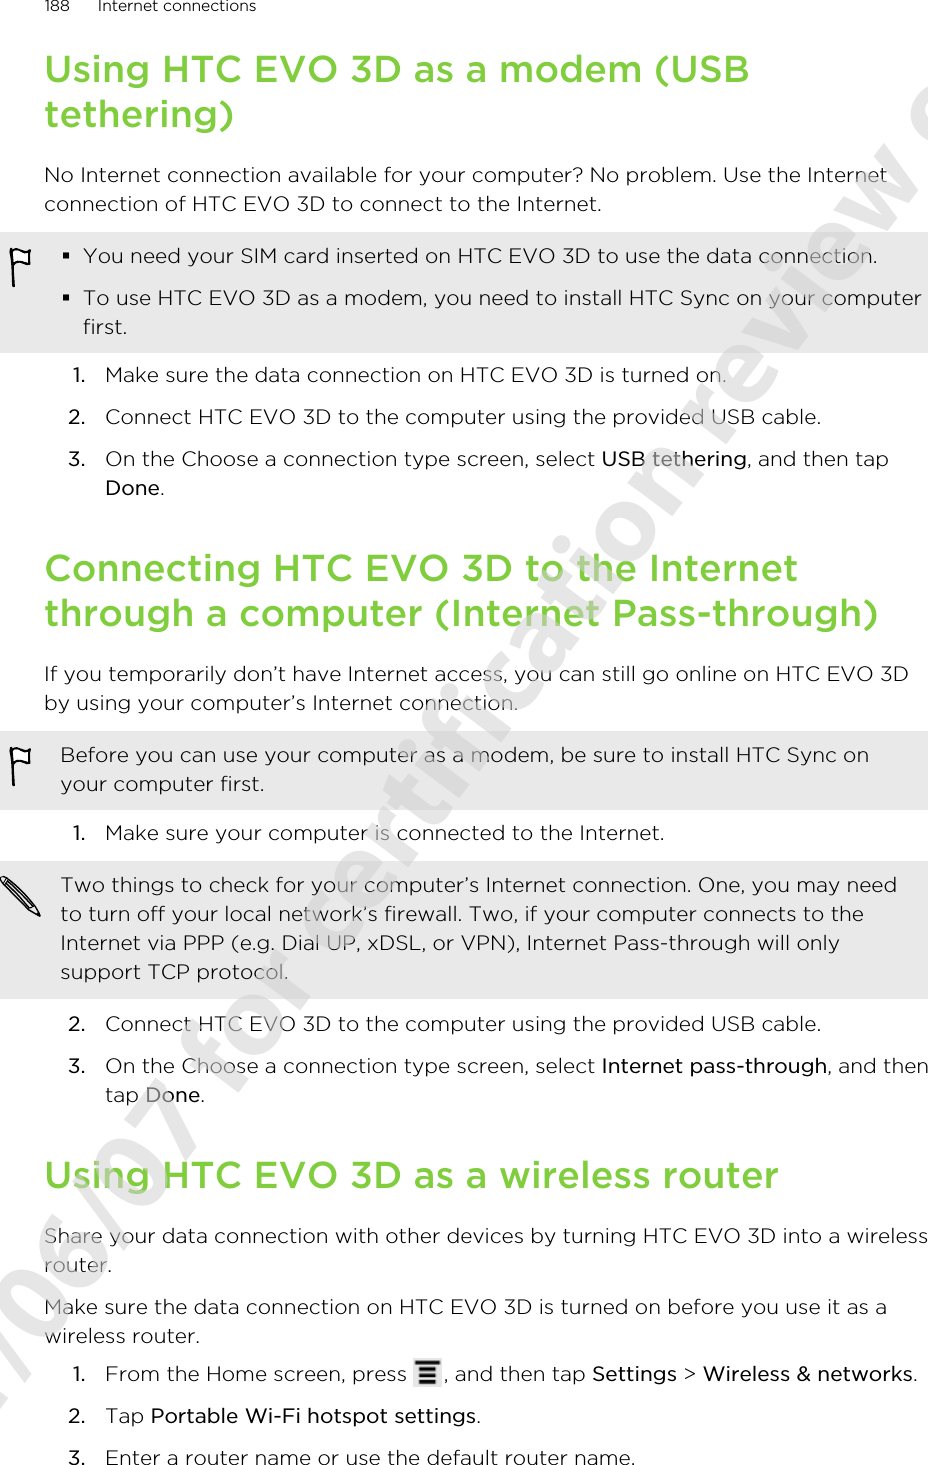 Using HTC EVO 3D as a modem (USBtethering)No Internet connection available for your computer? No problem. Use the Internetconnection of HTC EVO 3D to connect to the Internet.§You need your SIM card inserted on HTC EVO 3D to use the data connection.§To use HTC EVO 3D as a modem, you need to install HTC Sync on your computerfirst.1. Make sure the data connection on HTC EVO 3D is turned on.2. Connect HTC EVO 3D to the computer using the provided USB cable.3. On the Choose a connection type screen, select USB tethering, and then tapDone.Connecting HTC EVO 3D to the Internetthrough a computer (Internet Pass-through)If you temporarily don’t have Internet access, you can still go online on HTC EVO 3Dby using your computer’s Internet connection.Before you can use your computer as a modem, be sure to install HTC Sync onyour computer first.1. Make sure your computer is connected to the Internet. Two things to check for your computer’s Internet connection. One, you may needto turn off your local network’s firewall. Two, if your computer connects to theInternet via PPP (e.g. Dial UP, xDSL, or VPN), Internet Pass-through will onlysupport TCP protocol.2. Connect HTC EVO 3D to the computer using the provided USB cable.3. On the Choose a connection type screen, select Internet pass-through, and thentap Done.Using HTC EVO 3D as a wireless routerShare your data connection with other devices by turning HTC EVO 3D into a wirelessrouter.Make sure the data connection on HTC EVO 3D is turned on before you use it as awireless router.1. From the Home screen, press  , and then tap Settings &gt; Wireless &amp; networks.2. Tap Portable Wi-Fi hotspot settings.3. Enter a router name or use the default router name.188 Internet connections2011/06/07 for certification review only